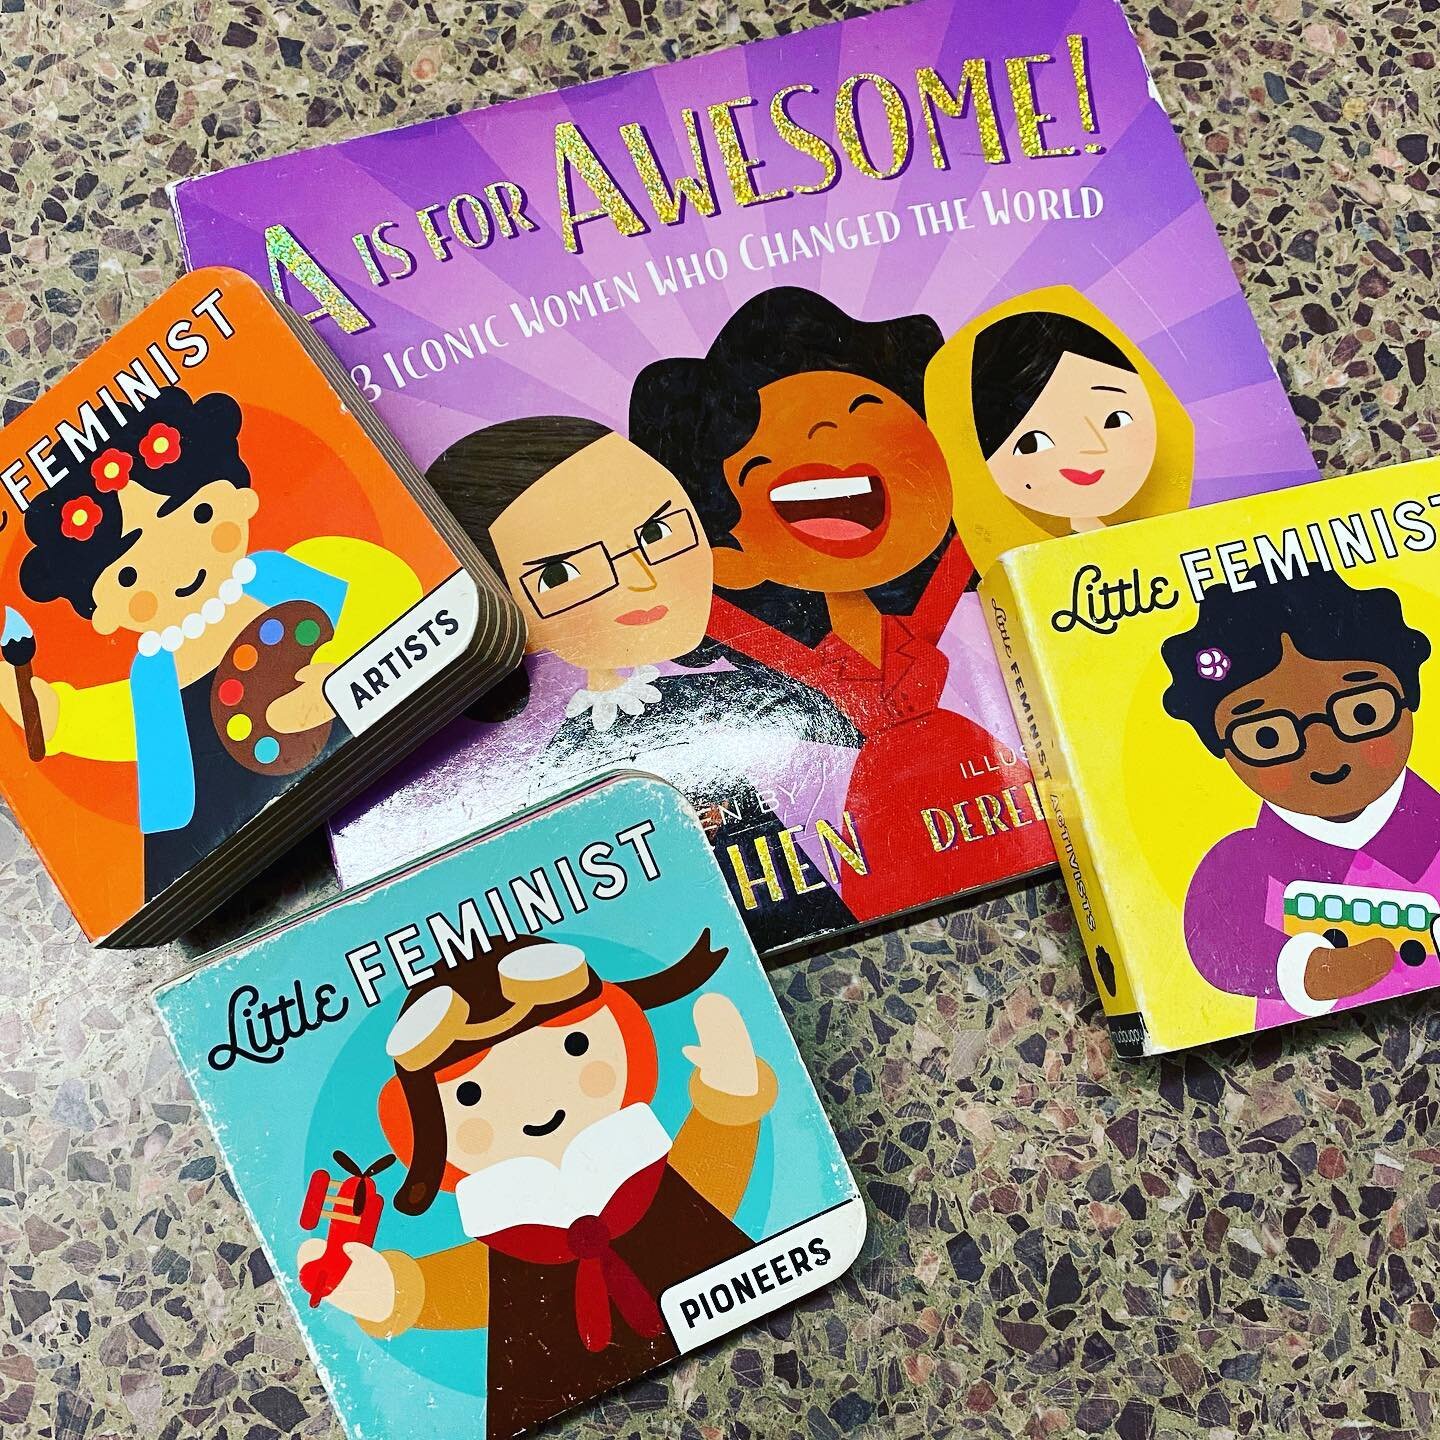 It is Women&rsquo;s History Month and Read Across America Day! What are you reading today? What are you reading to someone else today?

#readacrossamericaday #womenshistorymonth 
#kidlit